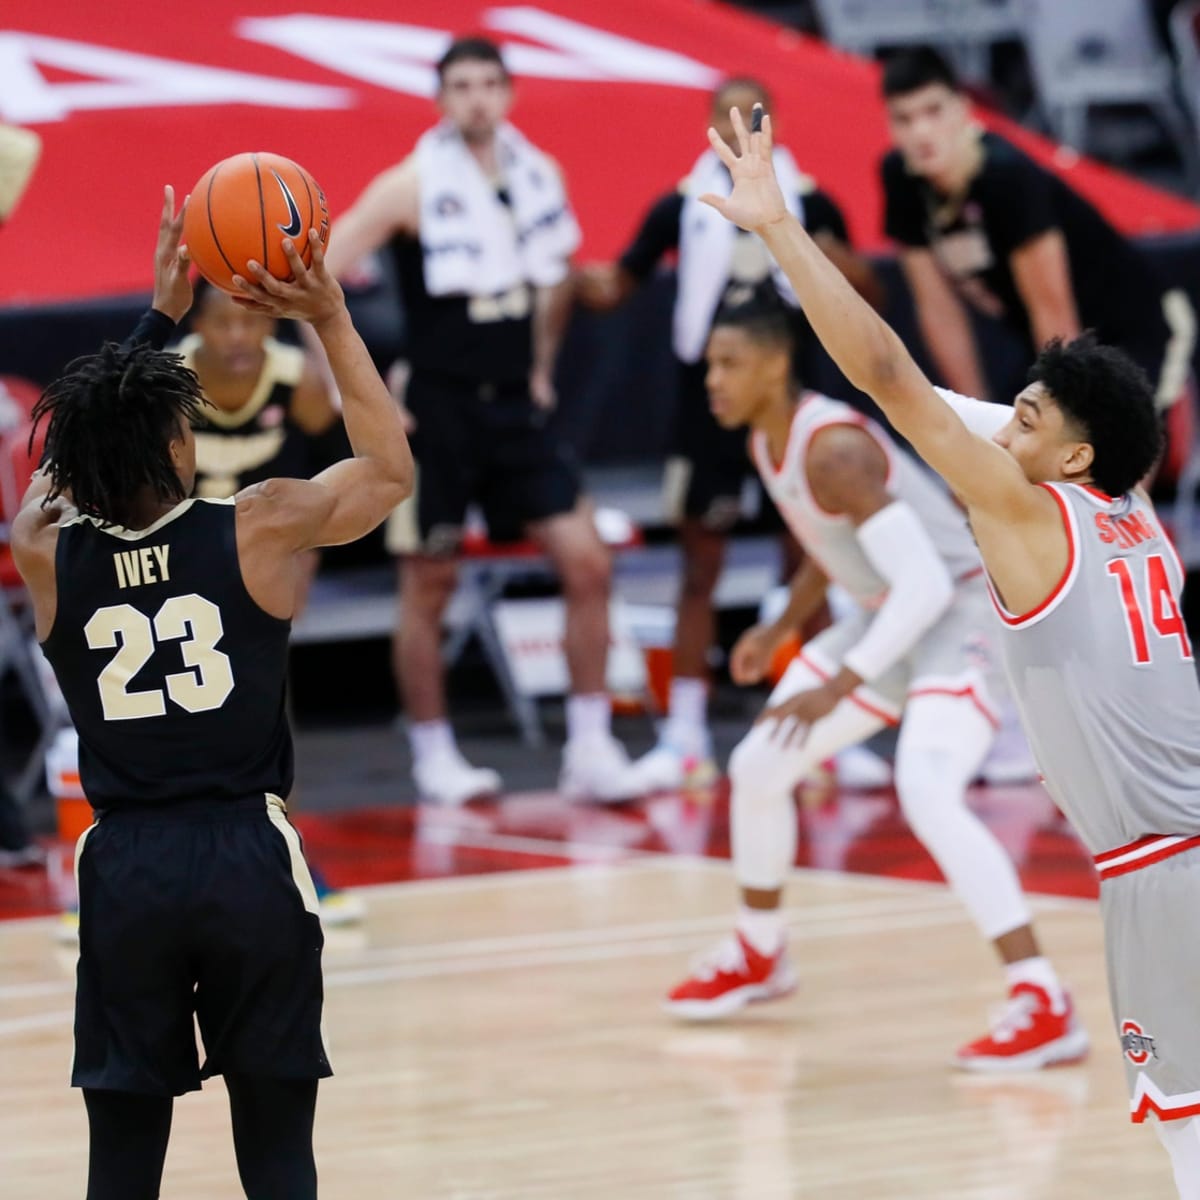 Ivey's late 3 finishes Purdue's rally past No. 15 Ohio State